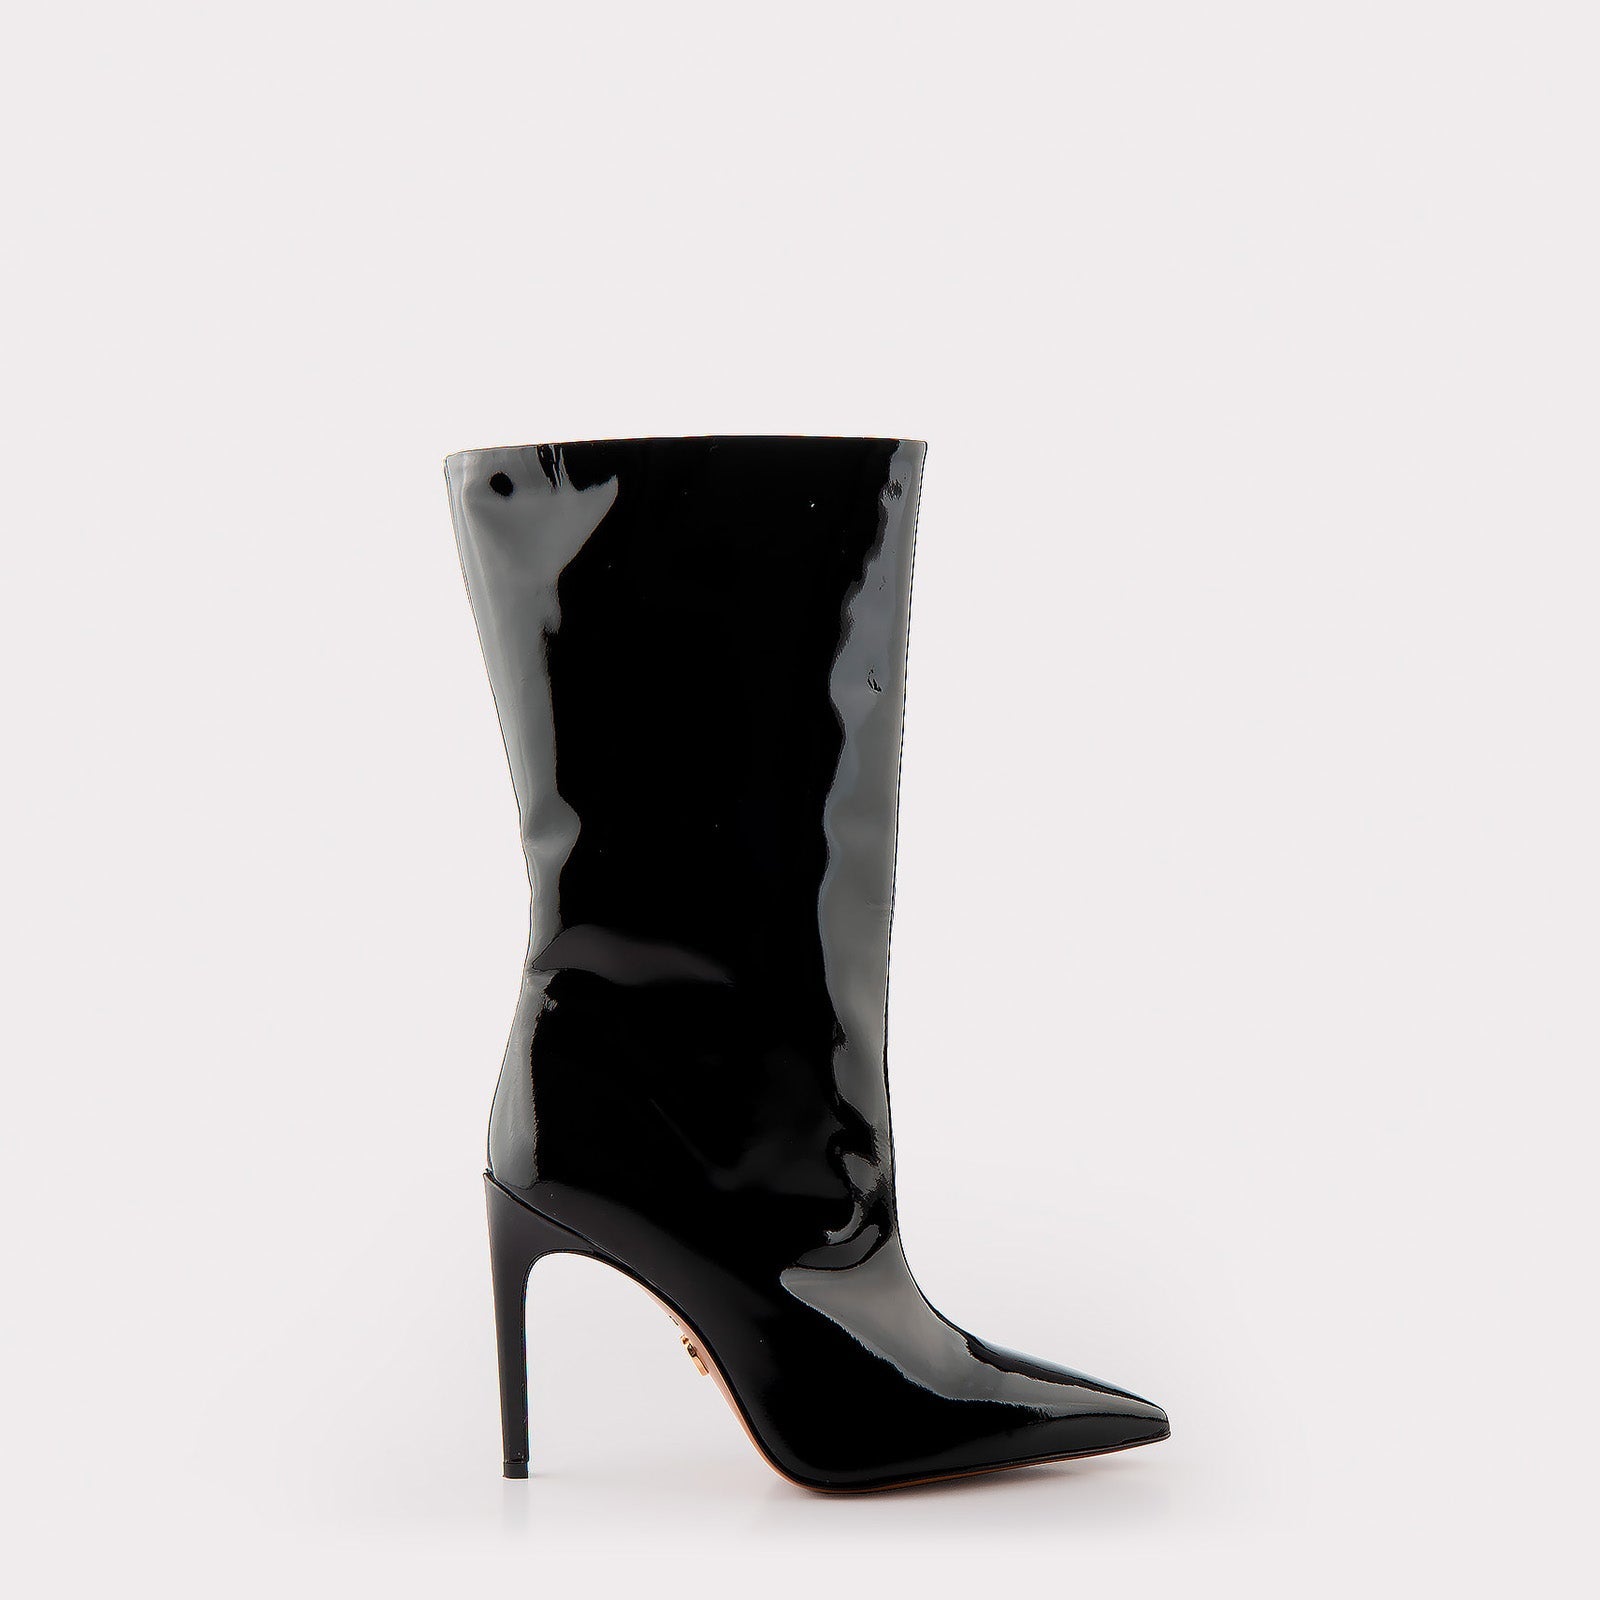 ANNIE 01 BLACK PATENT LEATHER BOOTS